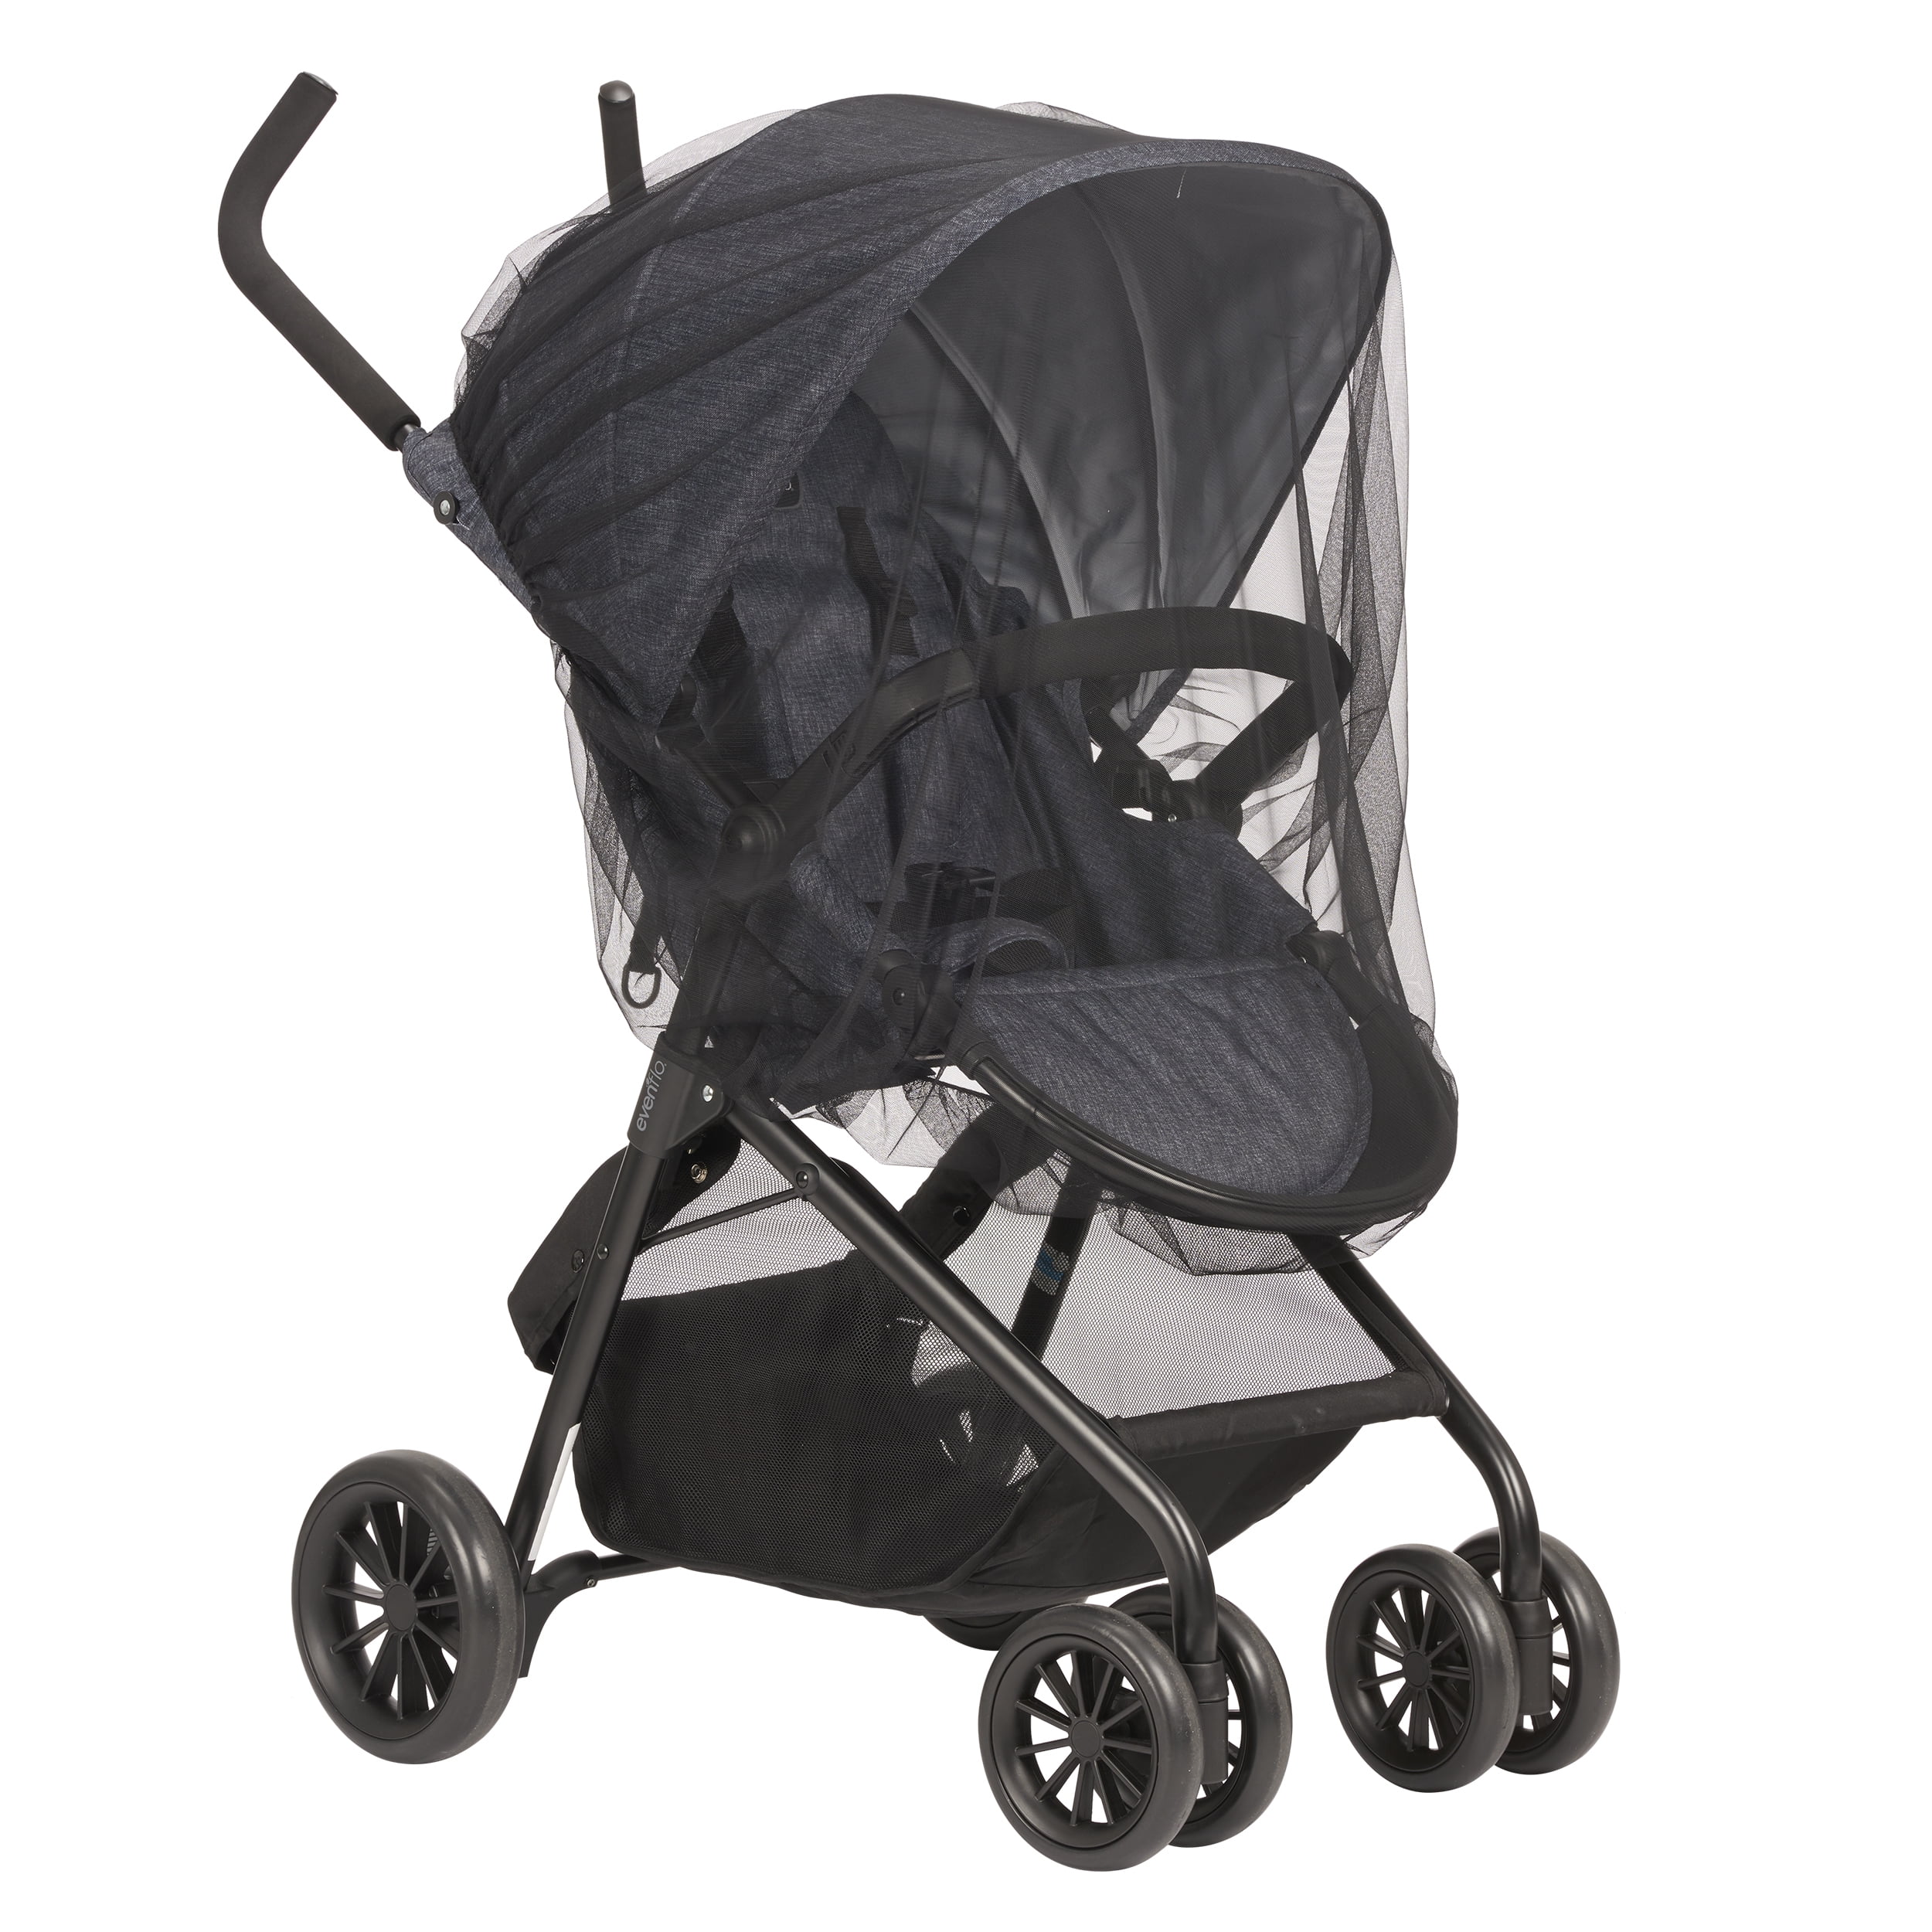 insect netting for strollers